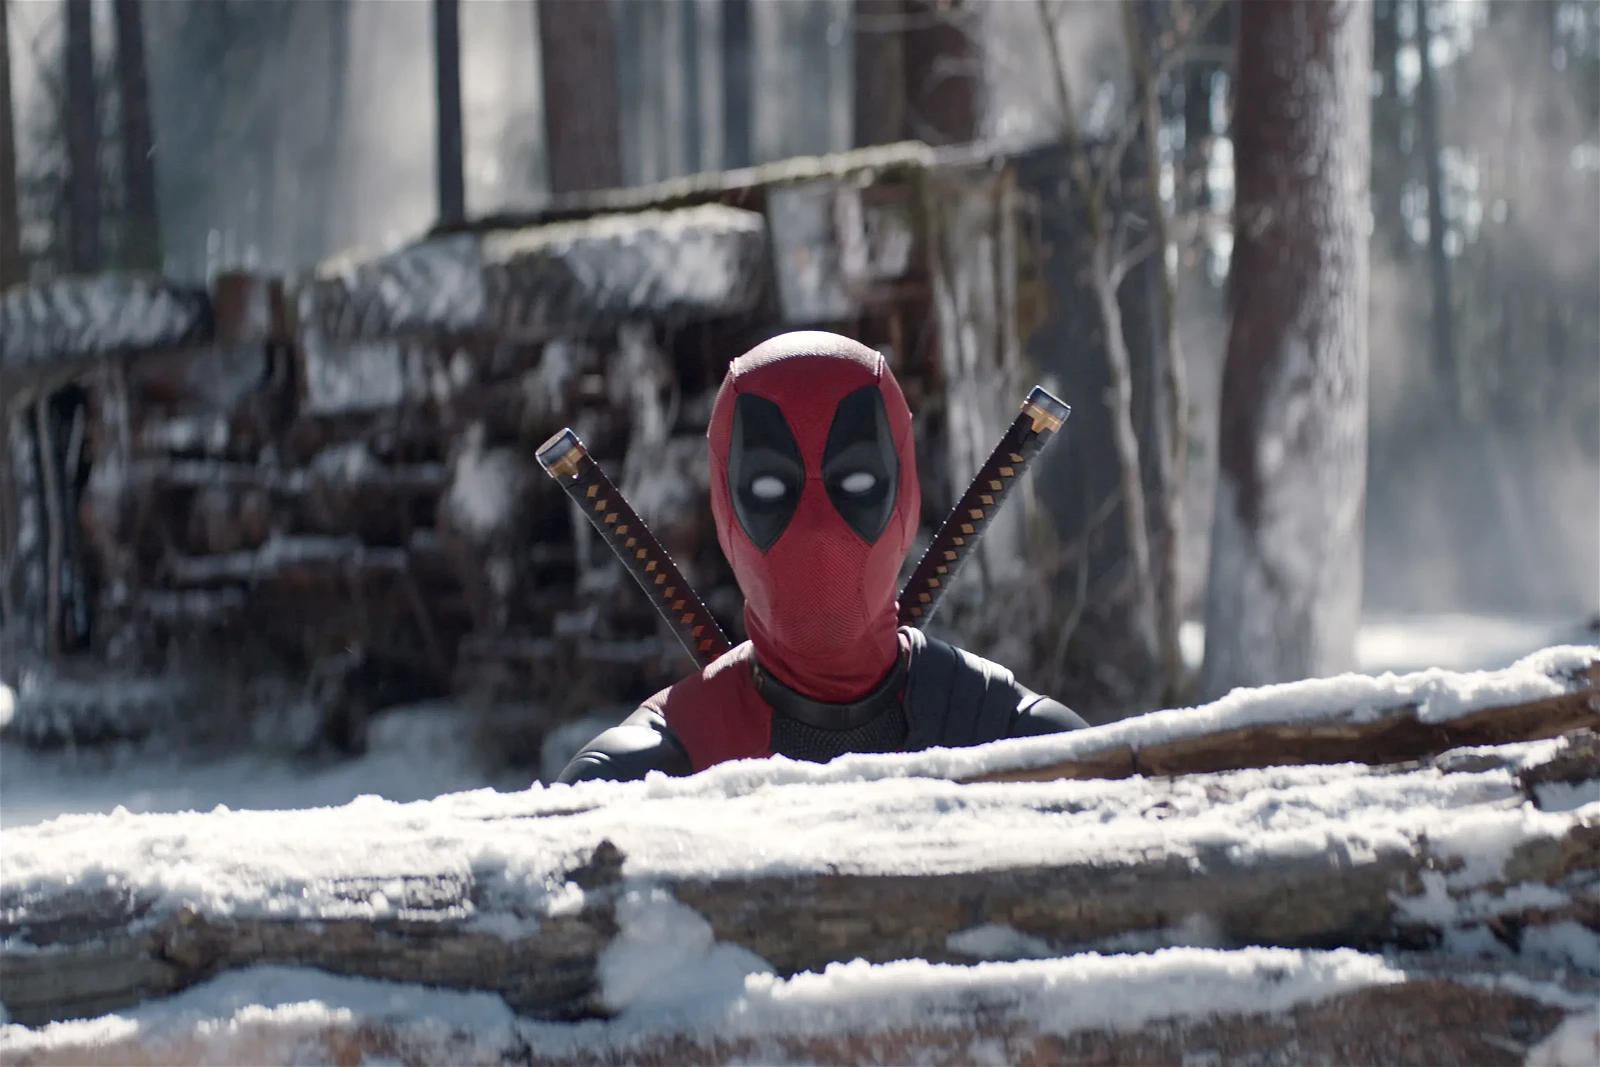 Ryan Reynolds as Deadpool in a still from Deadpool and Wolverine